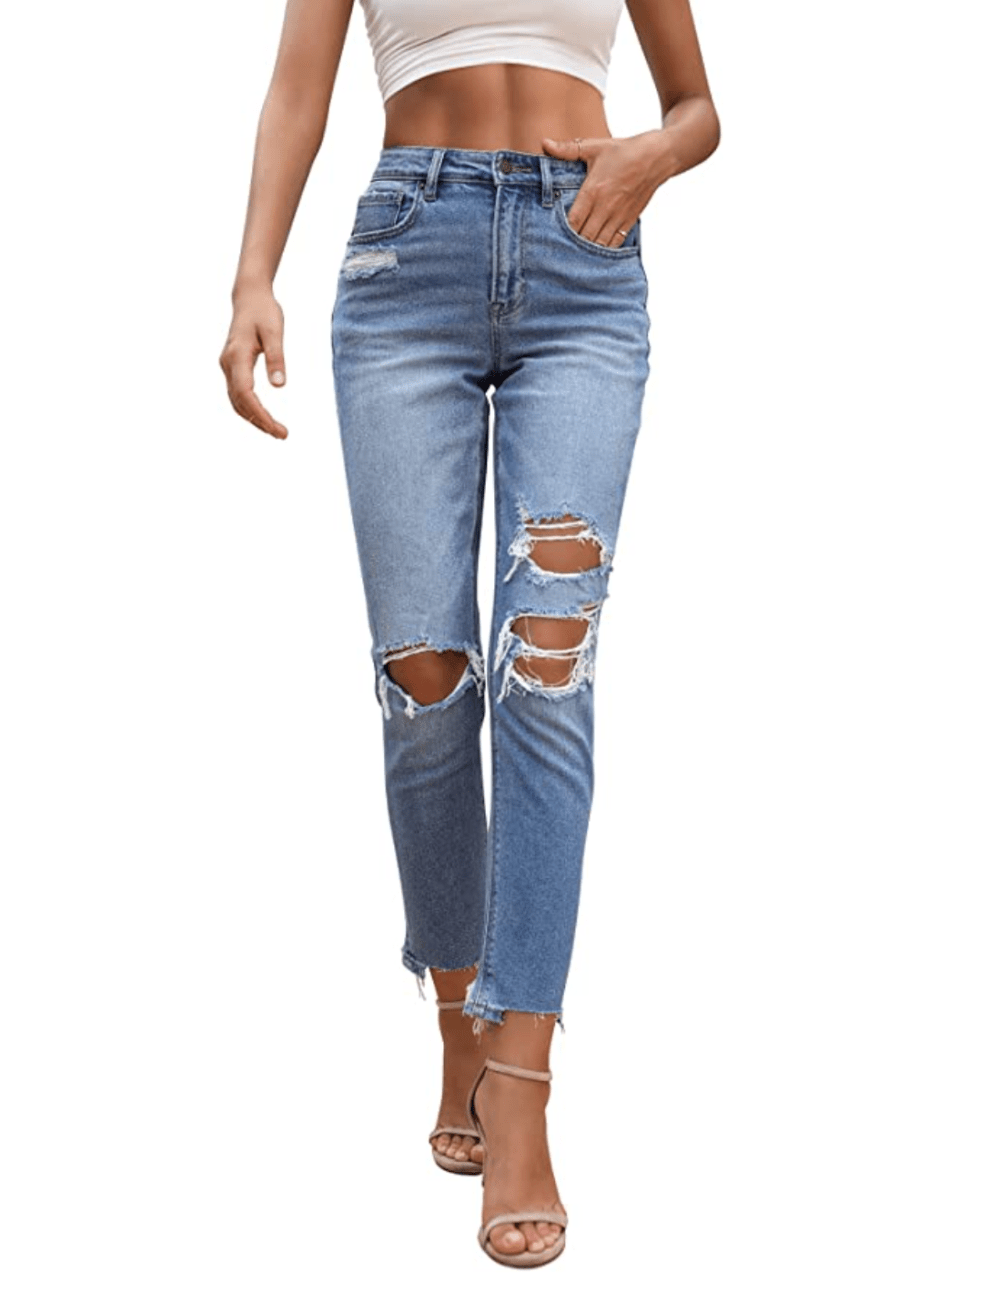 Ofluck Stretch Ripped Jeans May Be Some of the Comfiest Pants Ever | Us ...